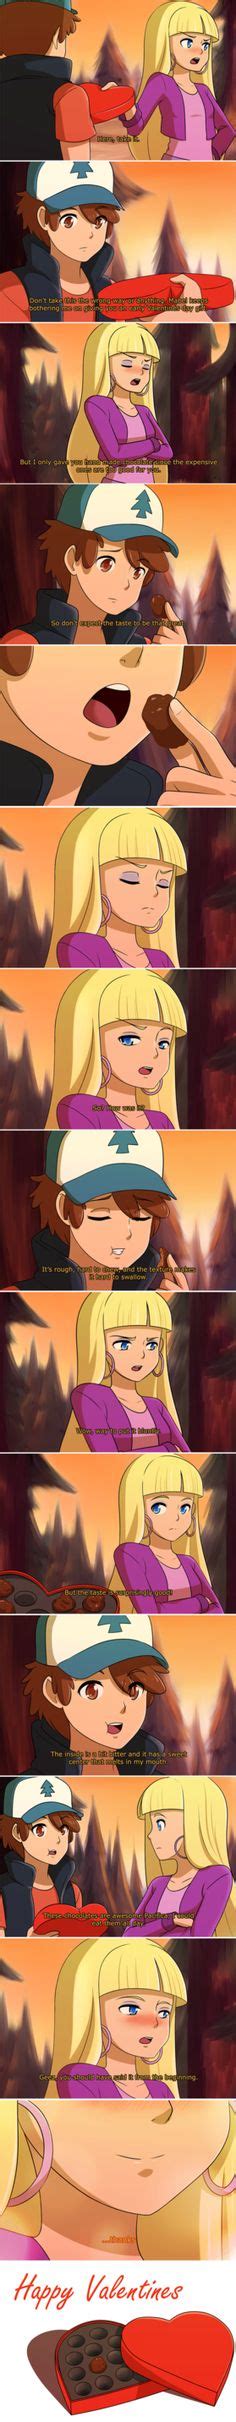 Dipper And Pacifica Gravity Falls Pinterest Gravity